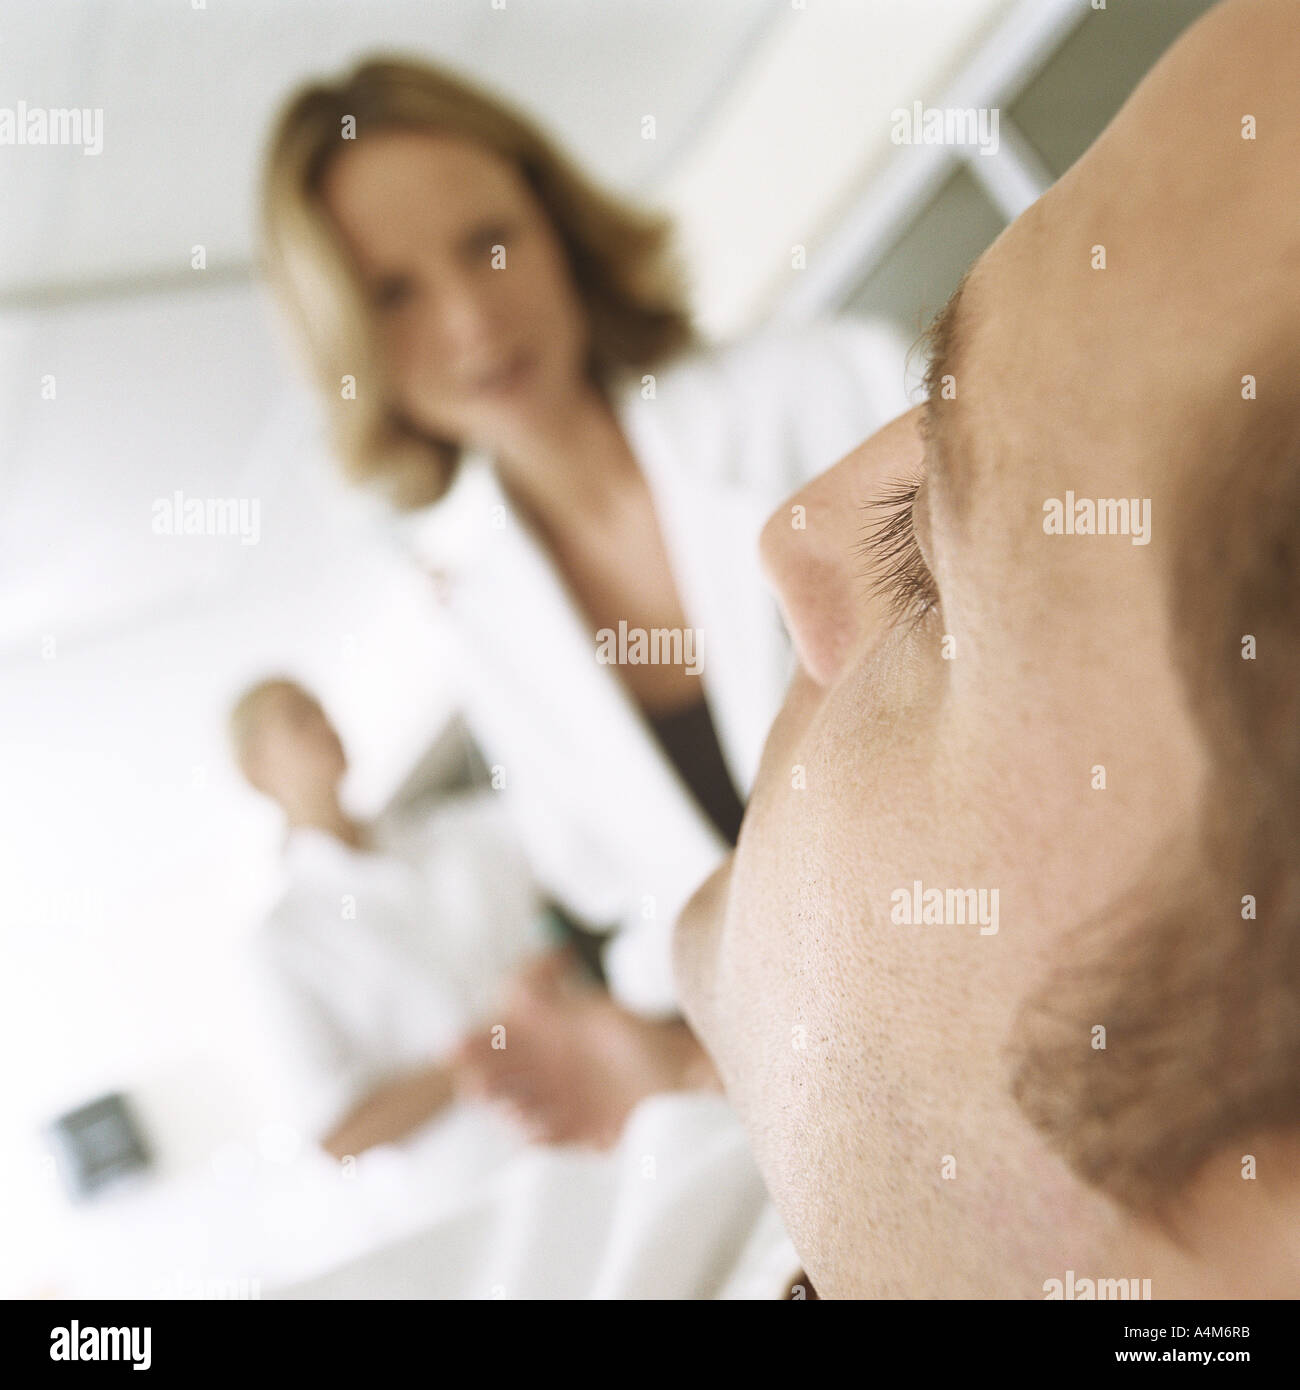 Doctor looking down at patient Stock Photo